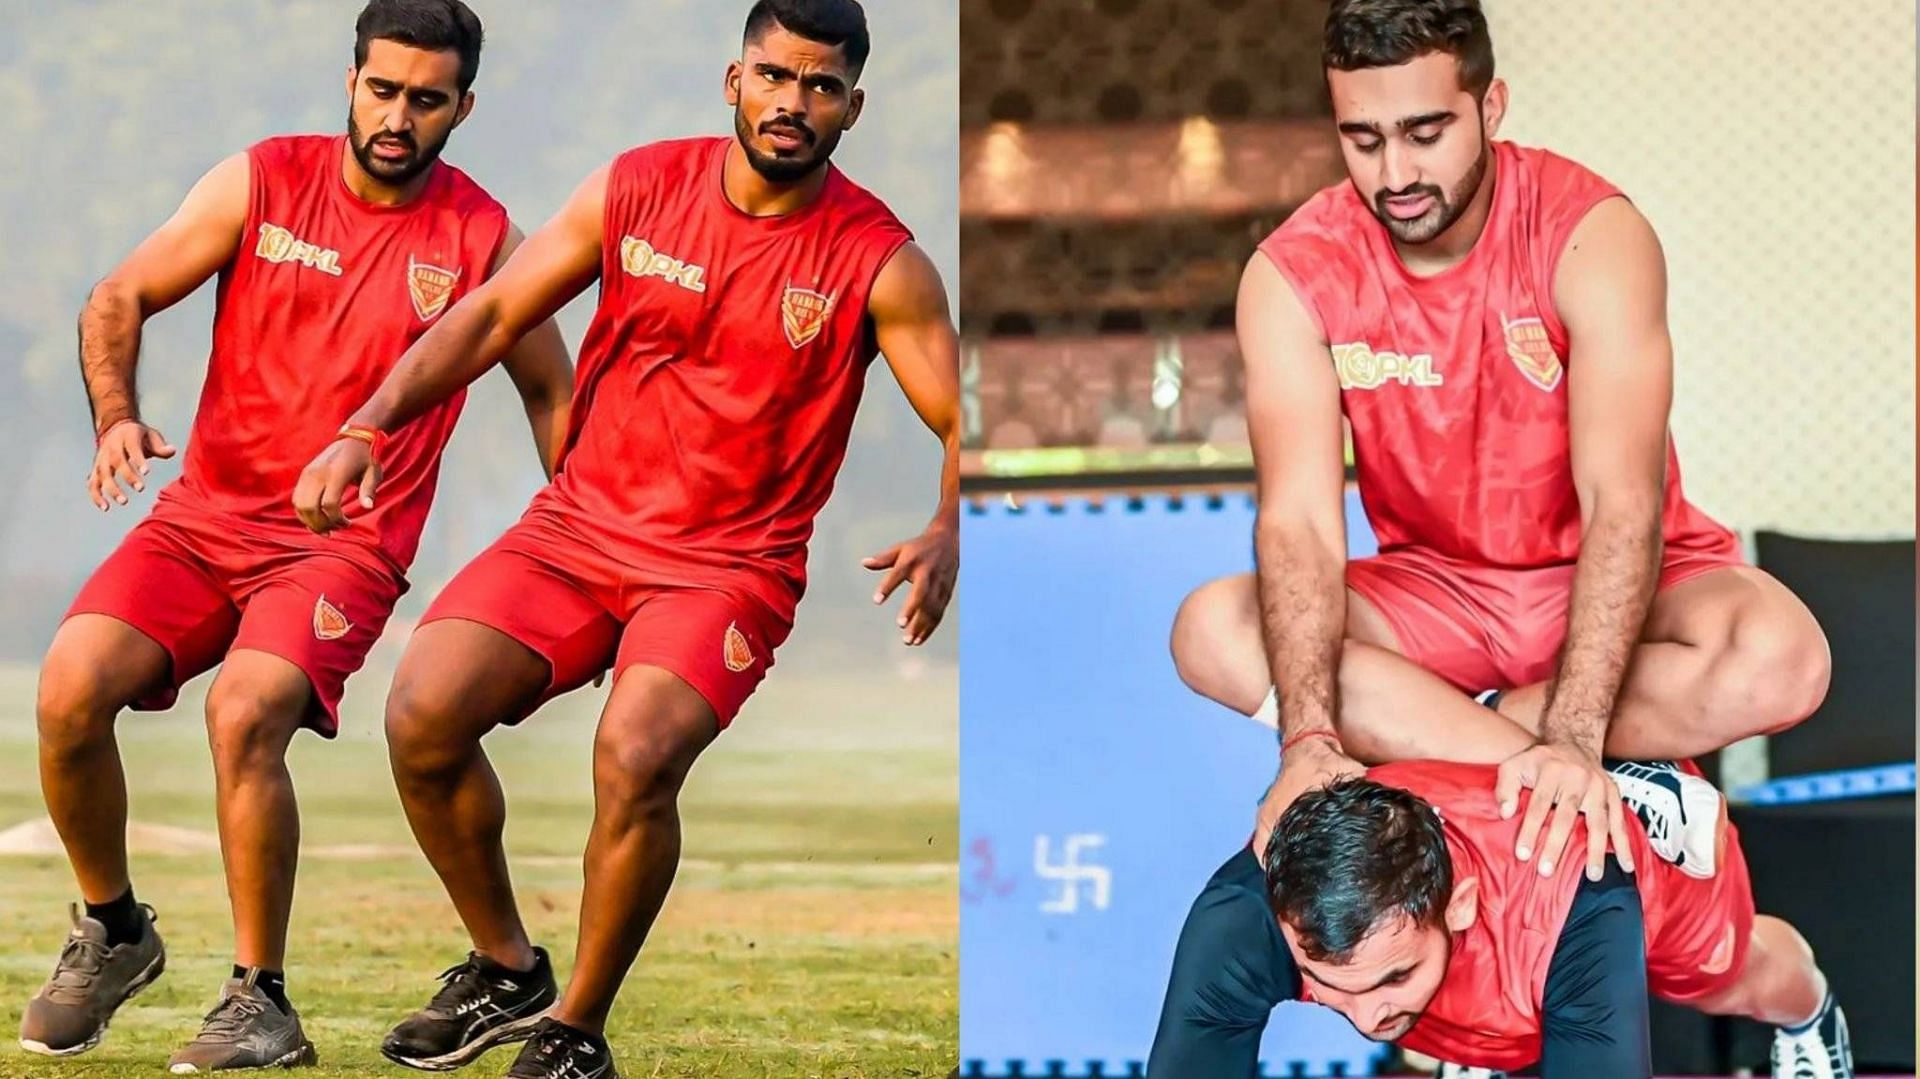 Dabang Delhi KC have some fresh faces in their squad (Image: Instagram)